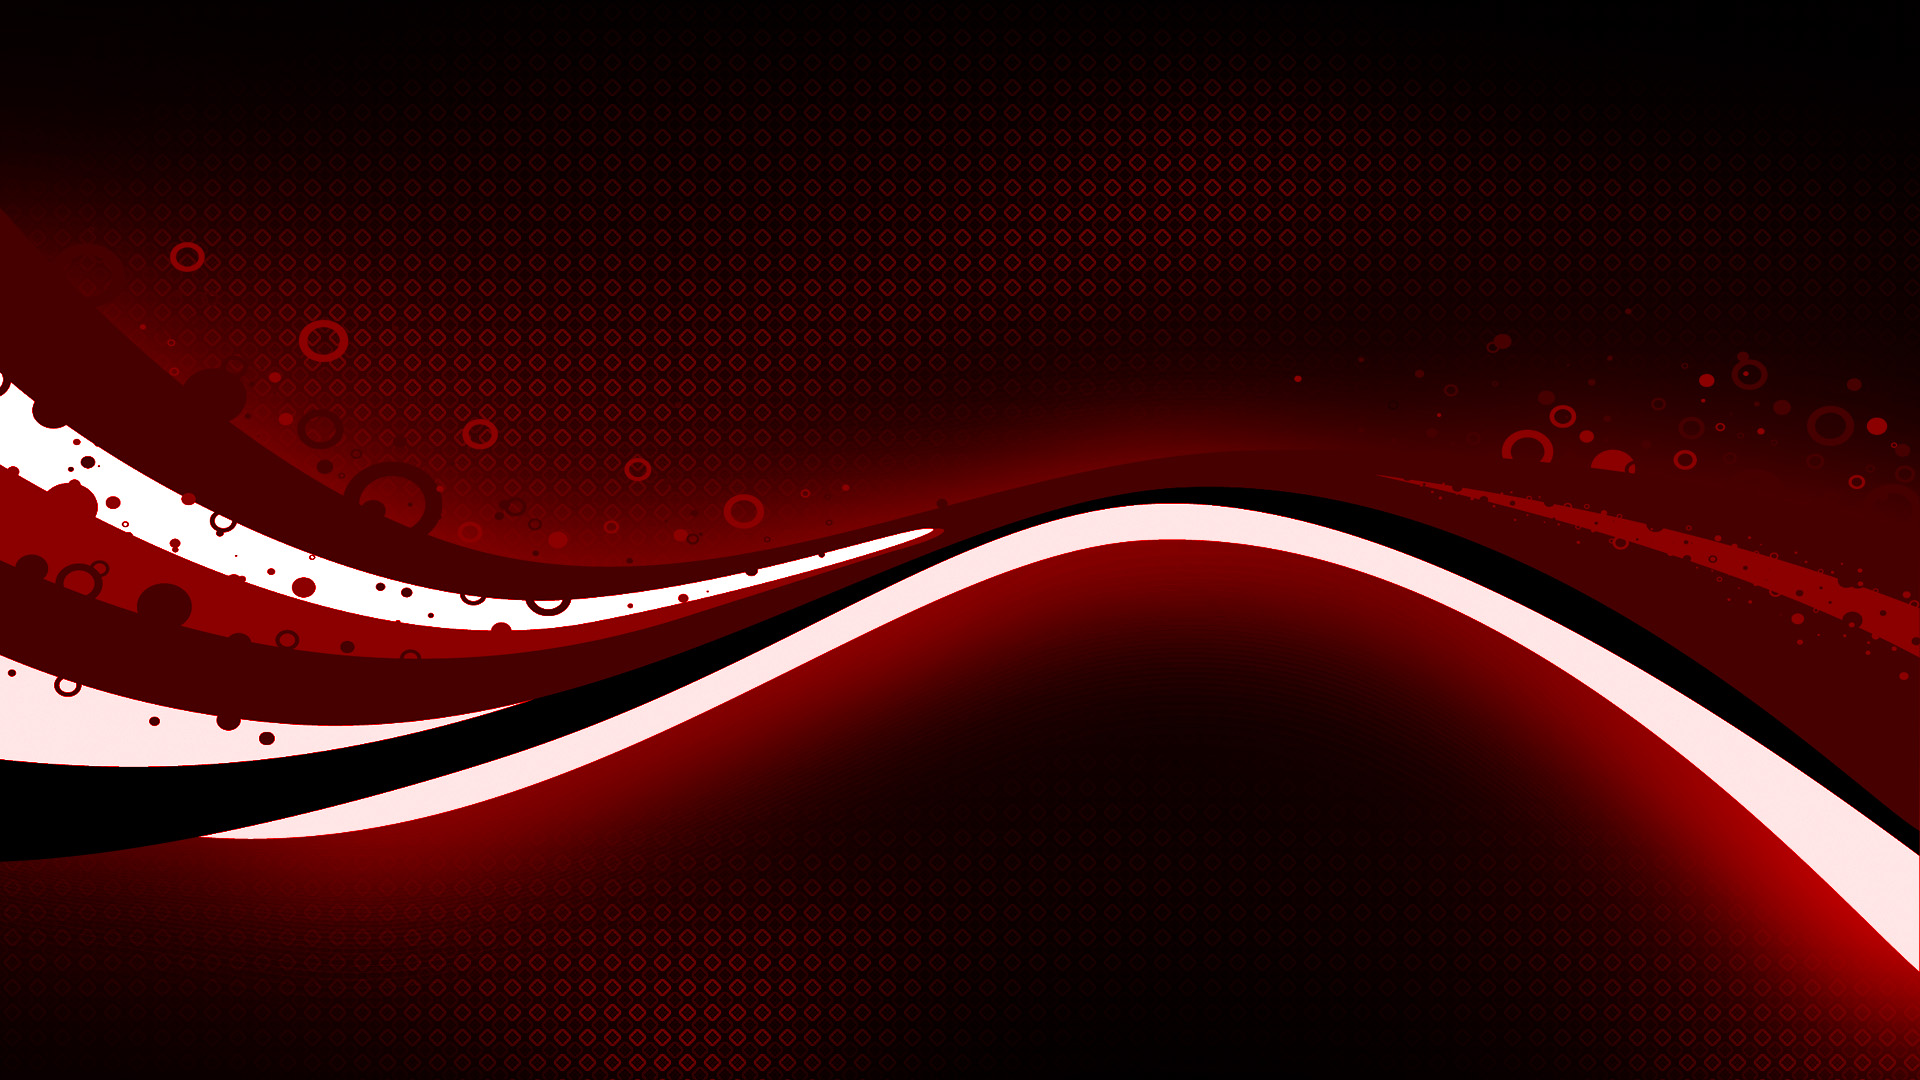 24 red hot wallpapers for your Android AndroidGuys